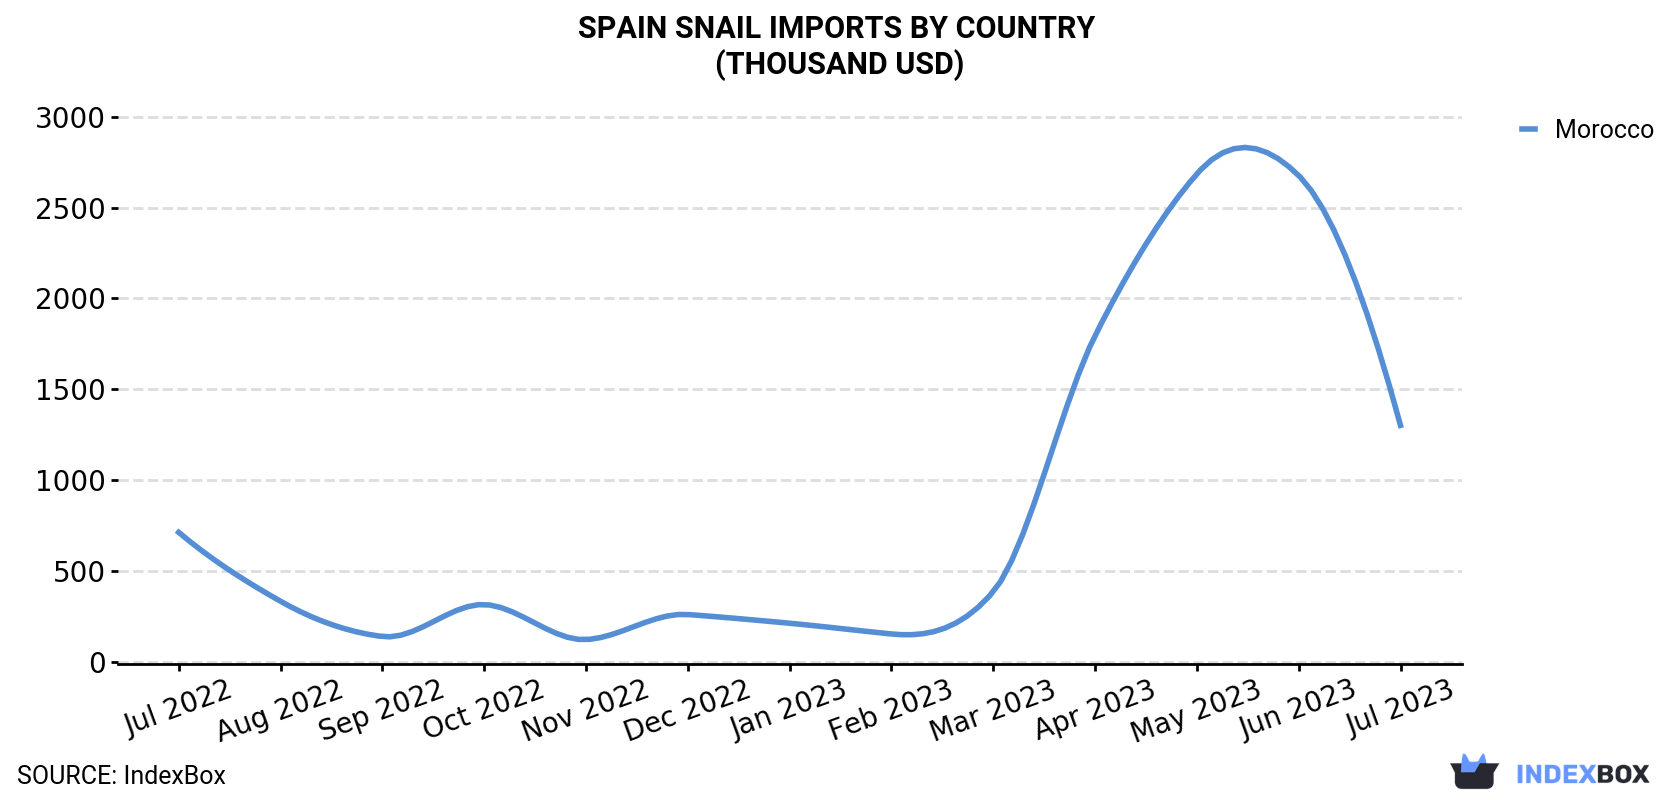 Spain Snail Imports By Country (Thousand USD)